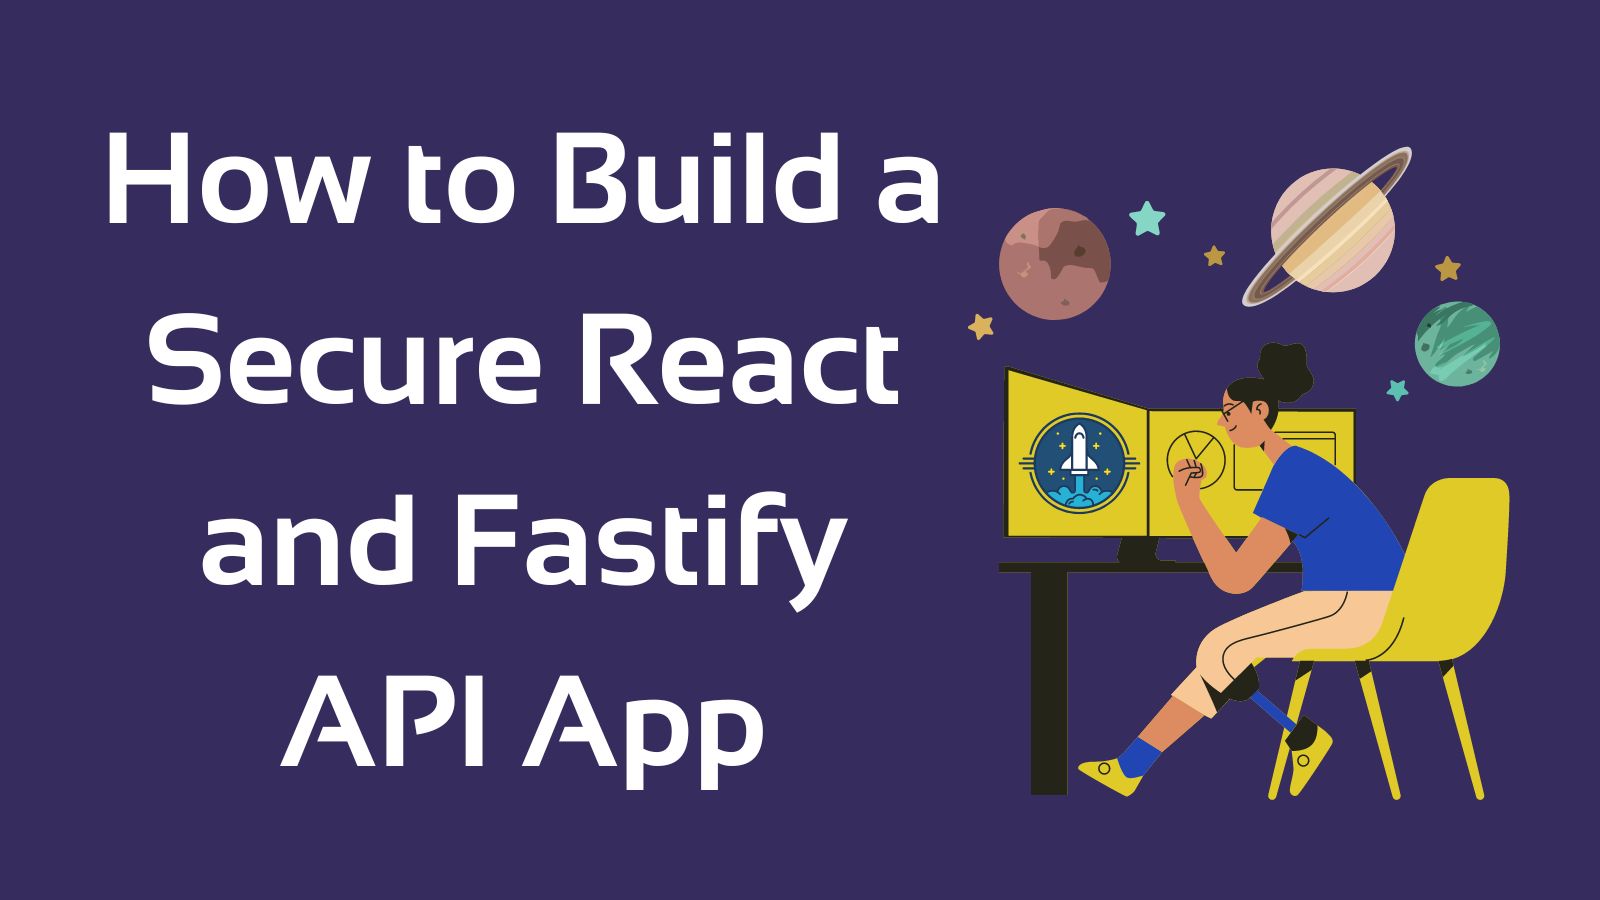 How to Build a Secure React and Fastify API App